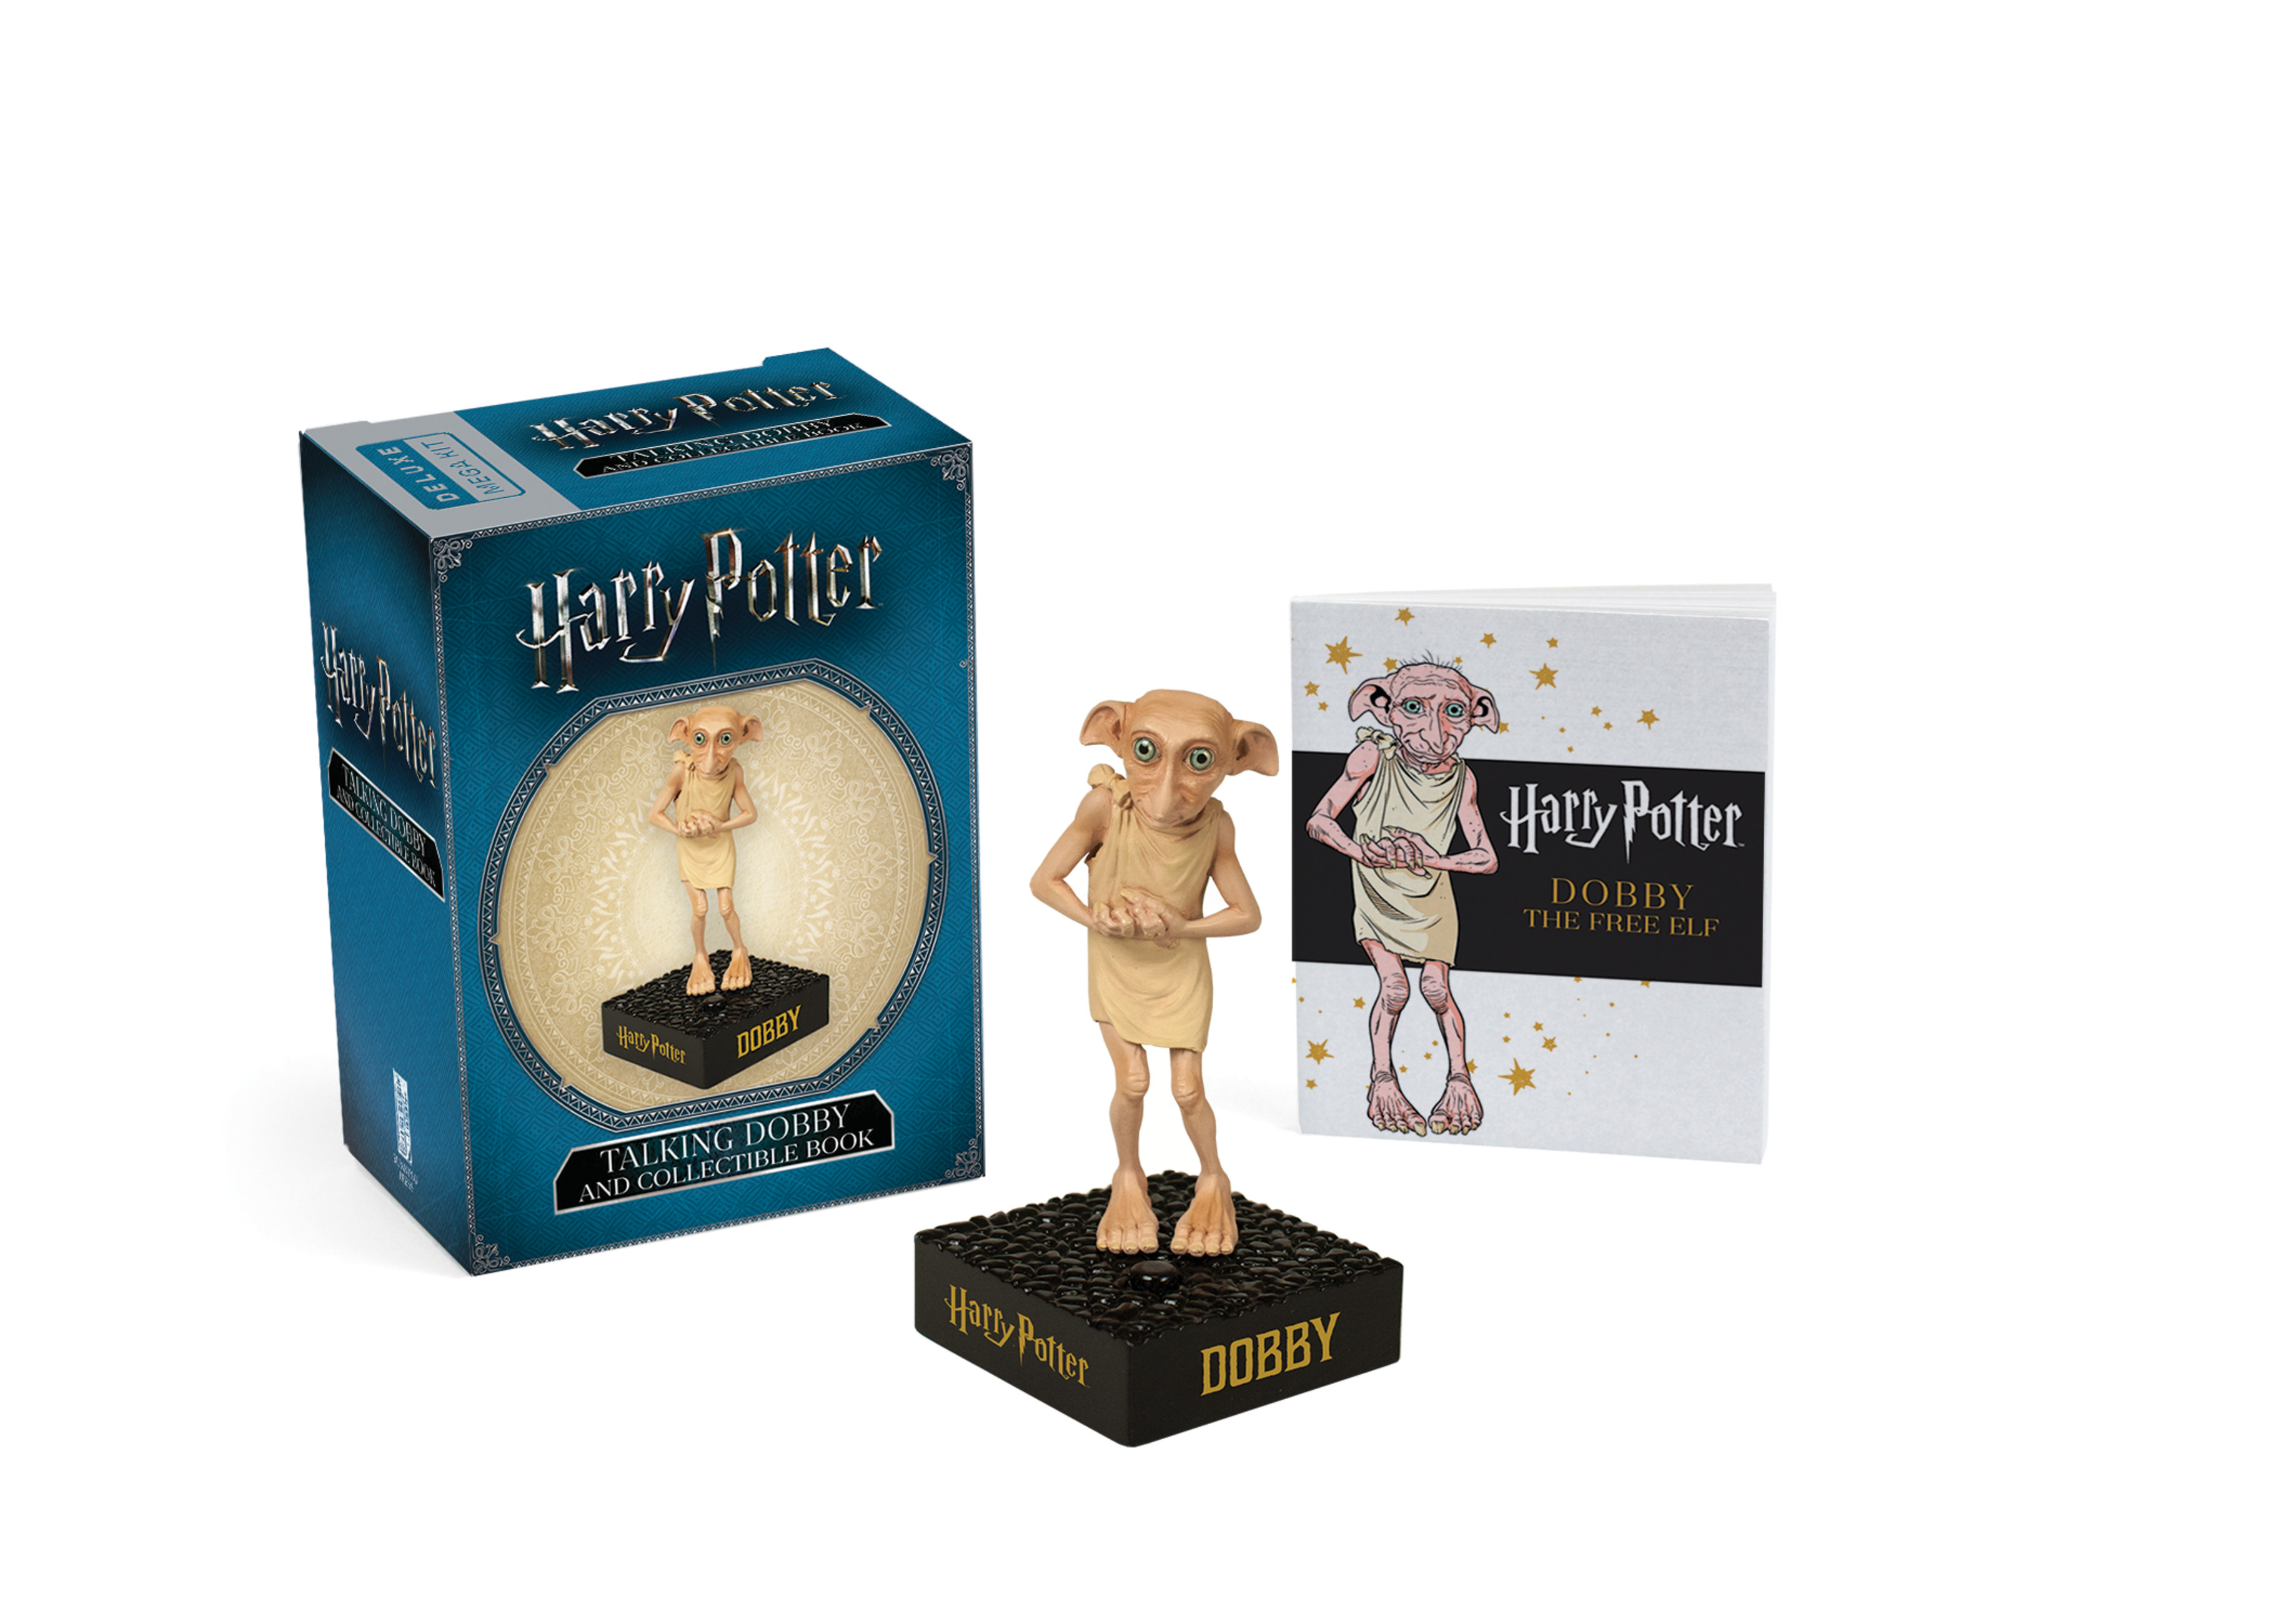 Kit - Harry Potter Talking Dobby and Collectible Book |